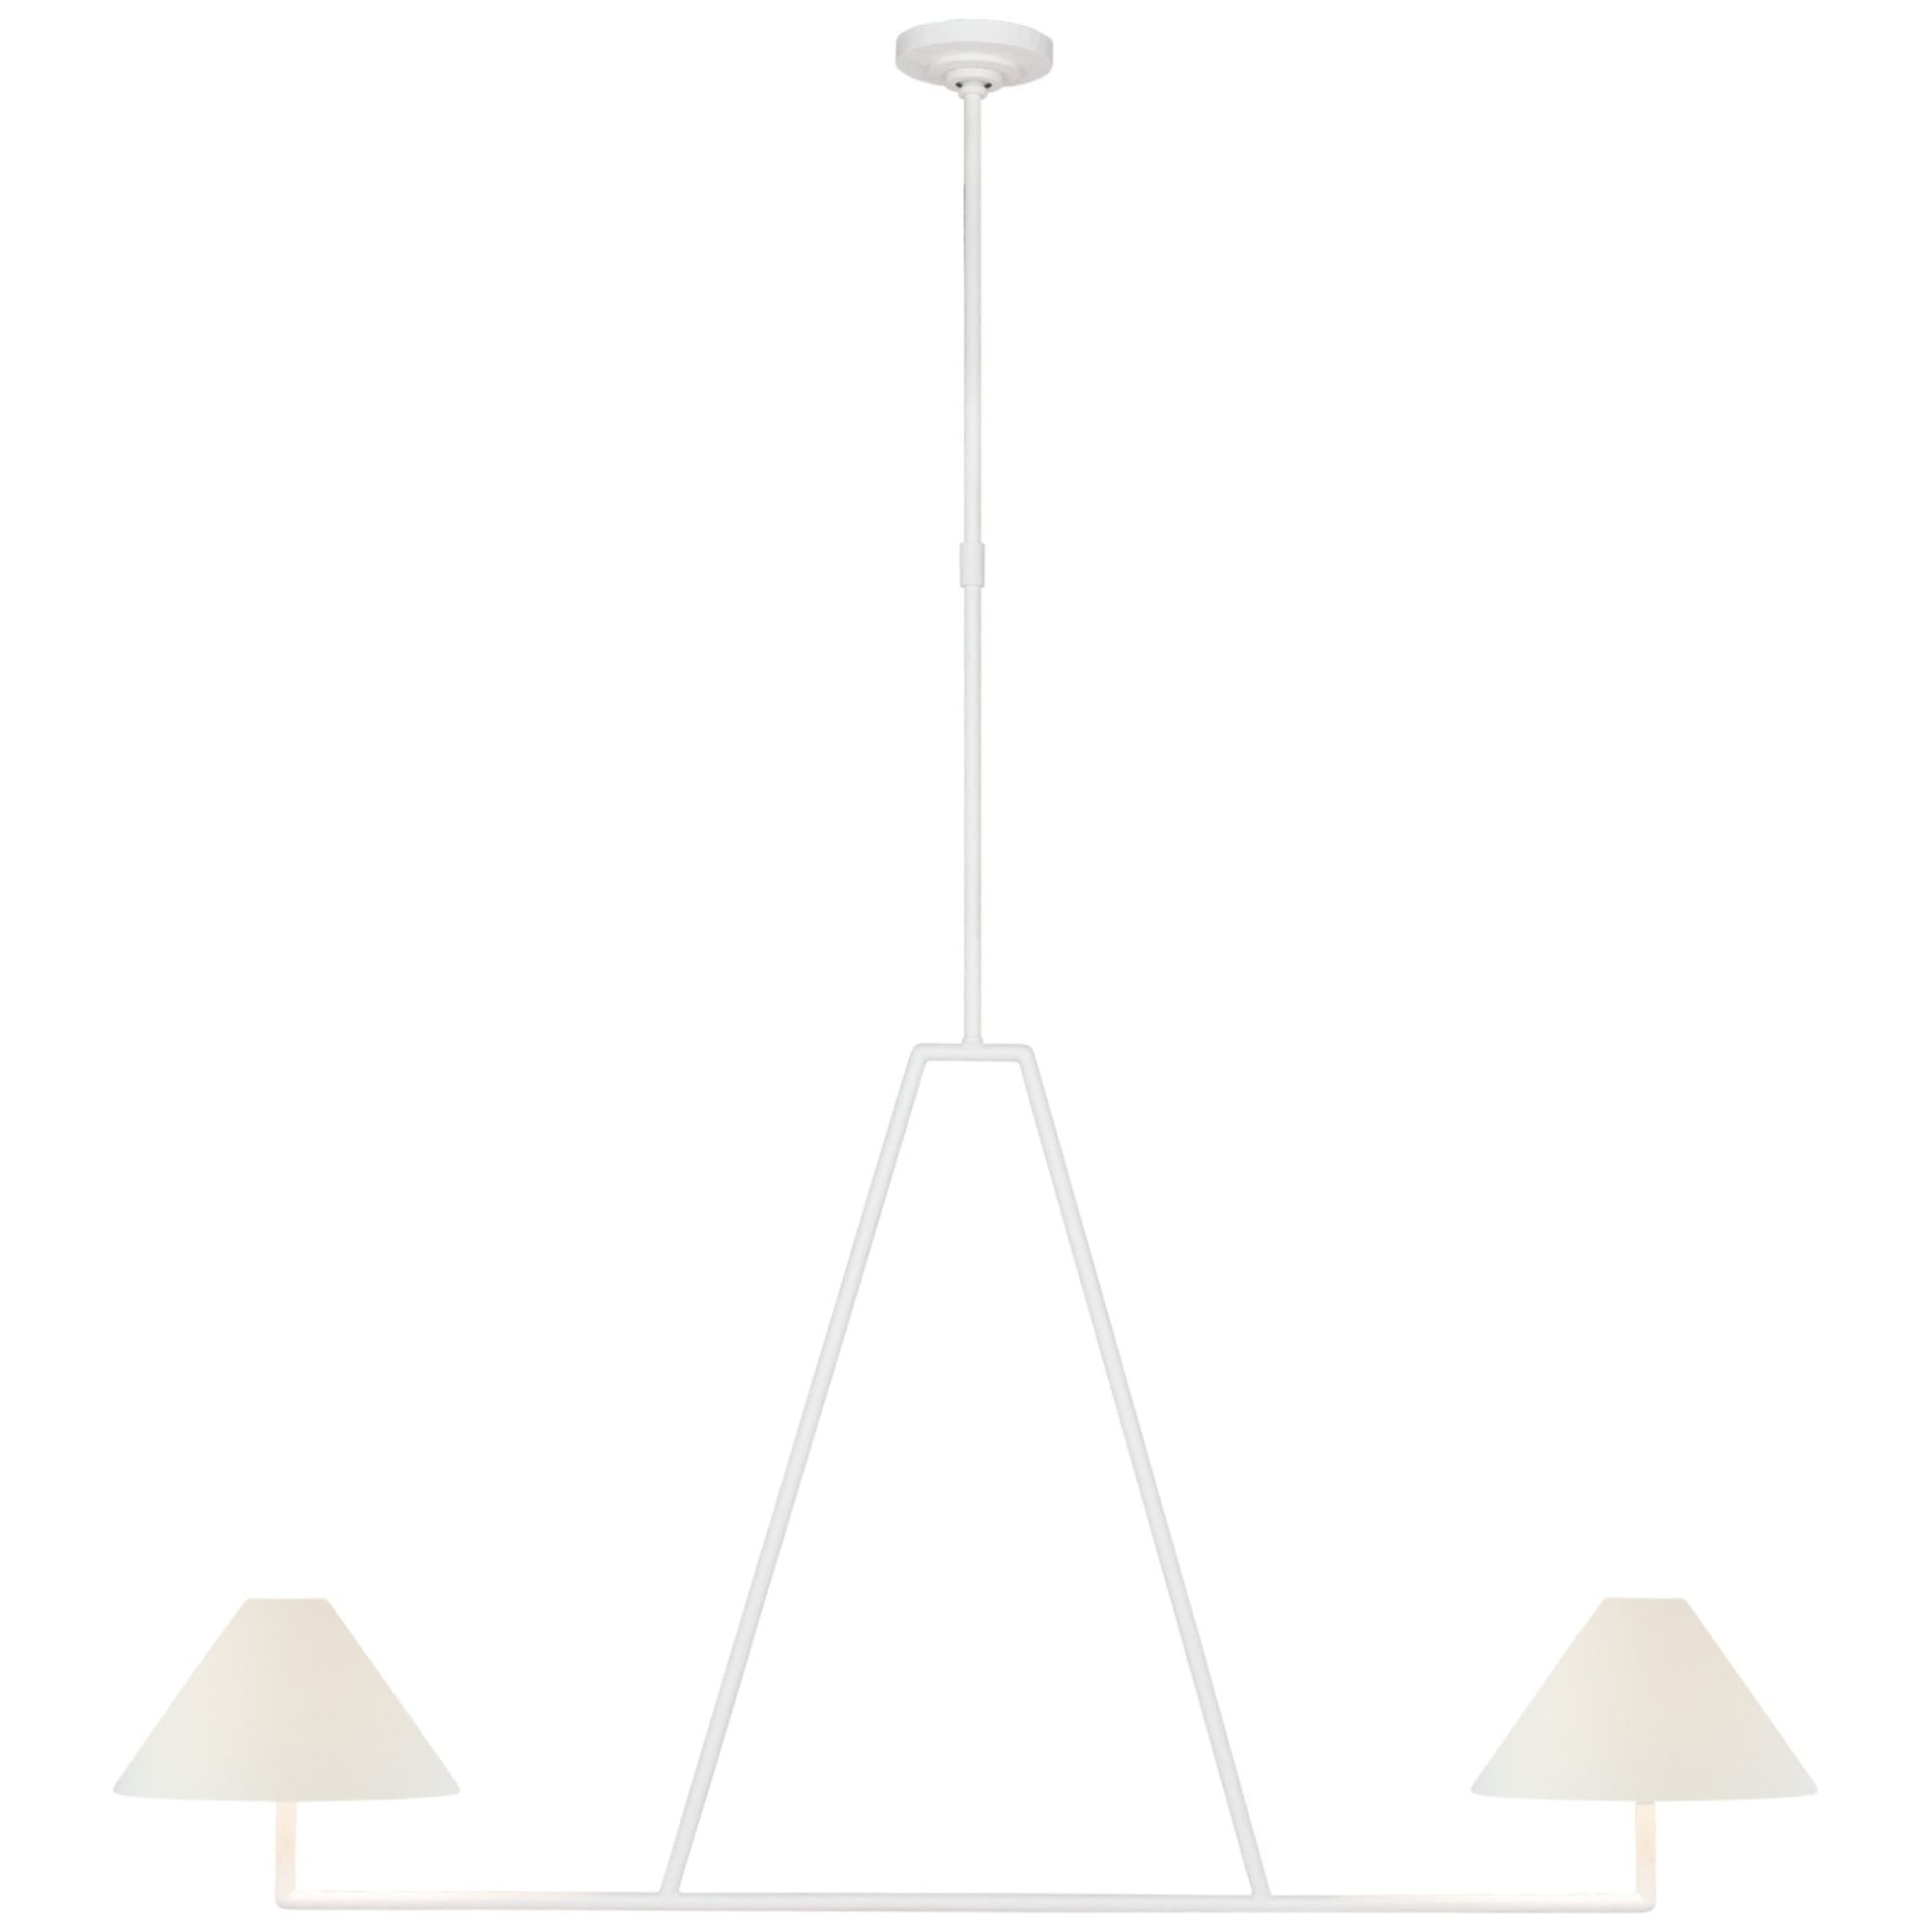 Chapman & Myers Ashton 59" Sculpted Chandelier in Plaster White with Linen Shades